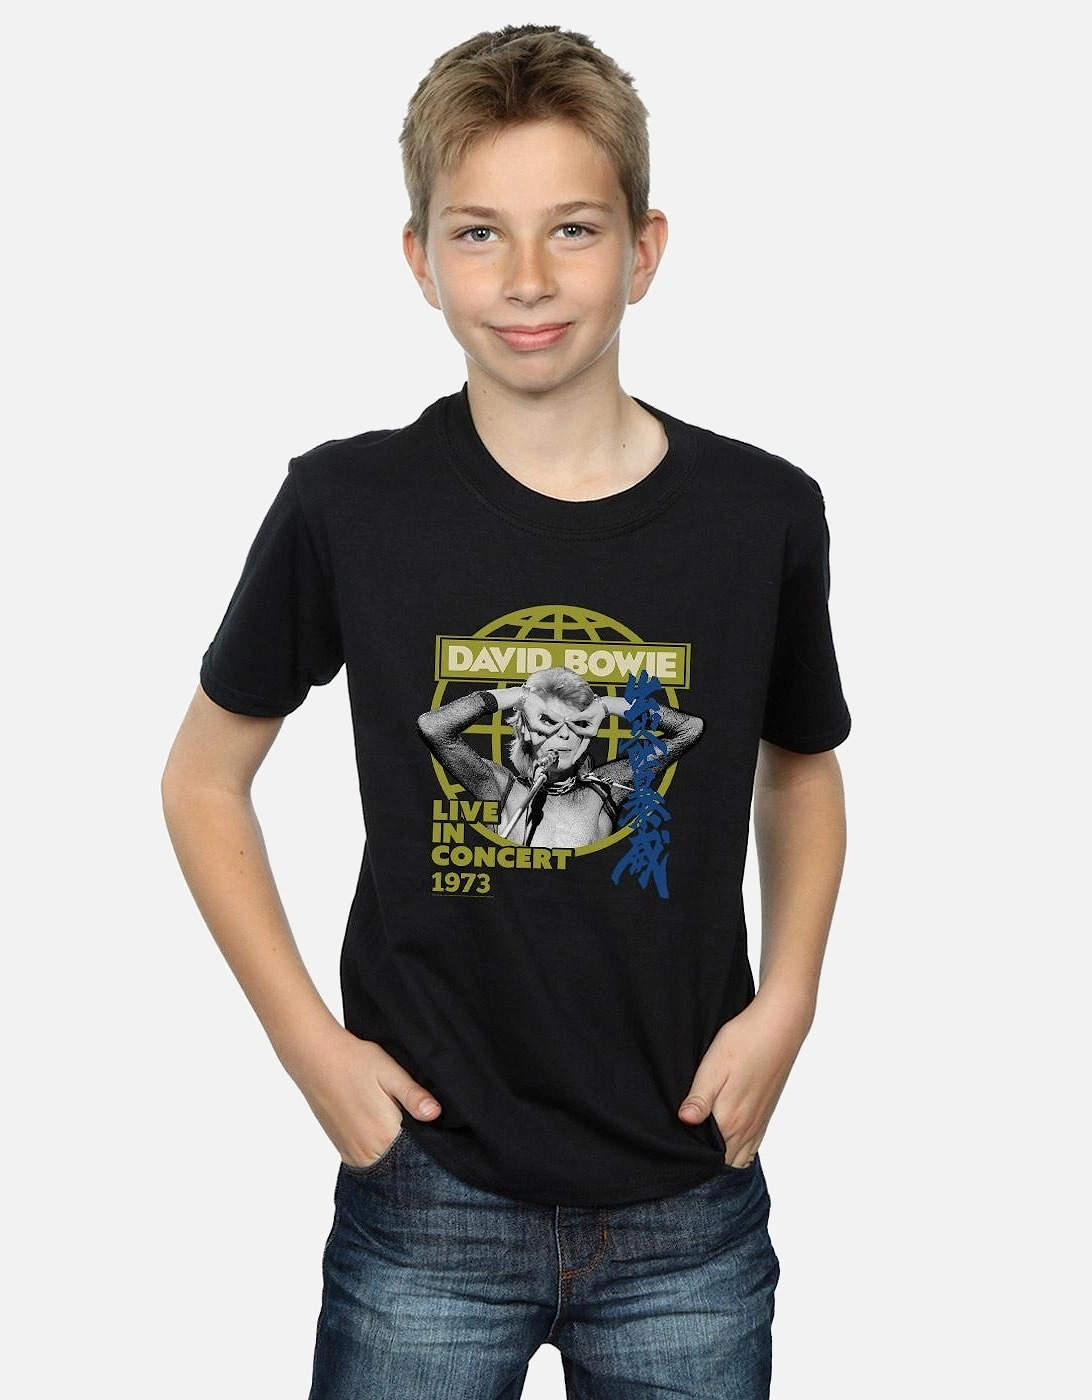 Boys Live In Concert T-Shirt